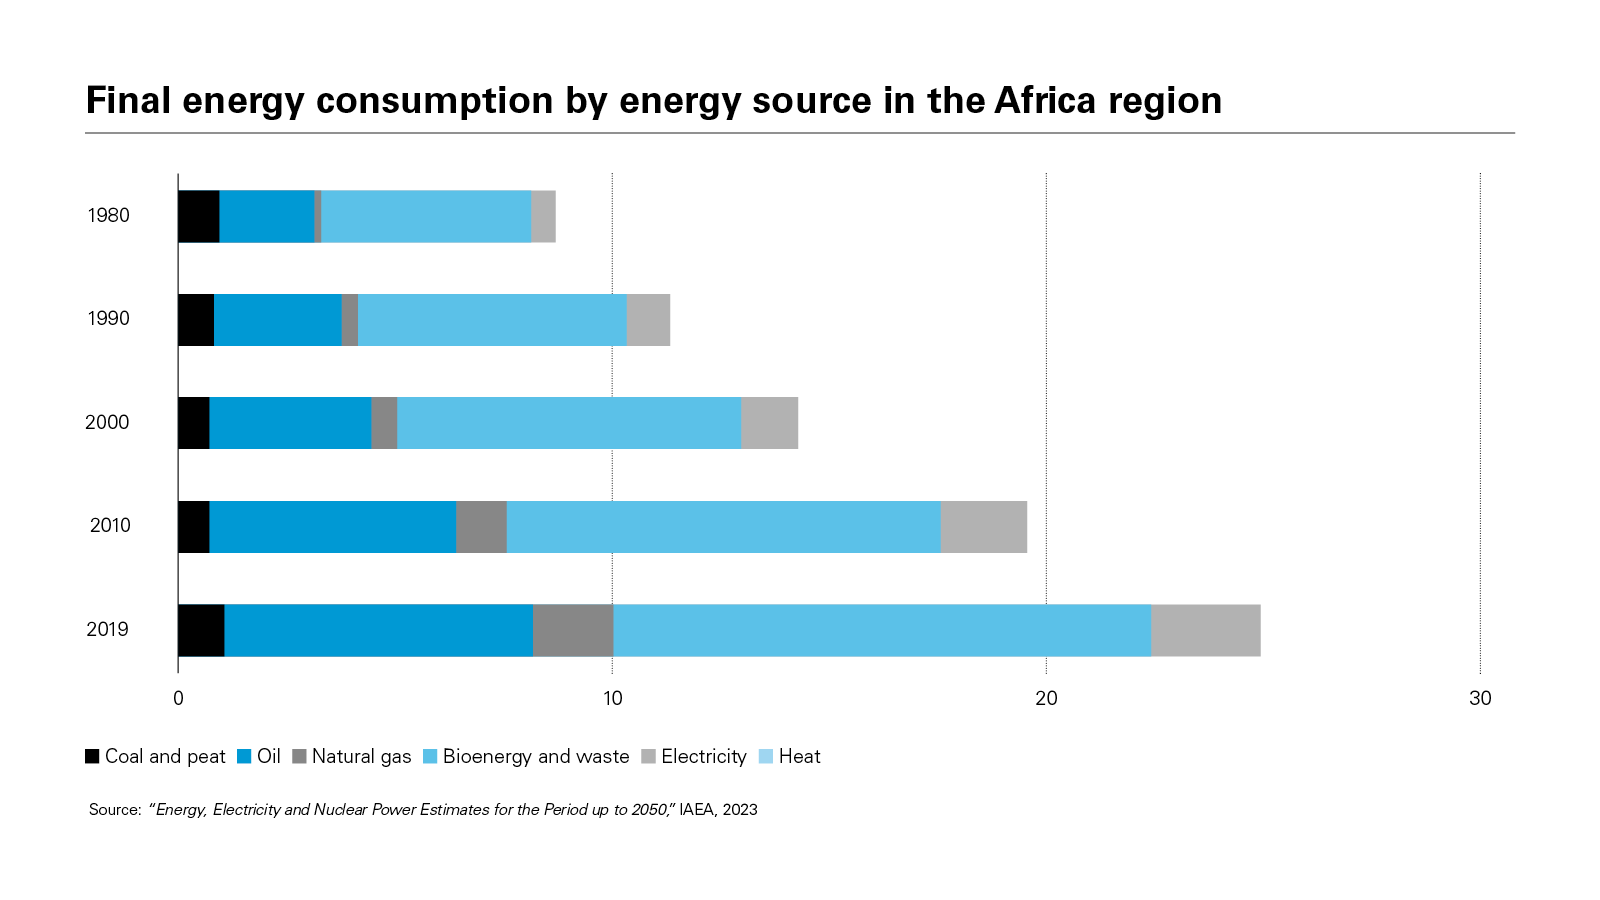 Final energy consumption by energy source in the Africa region